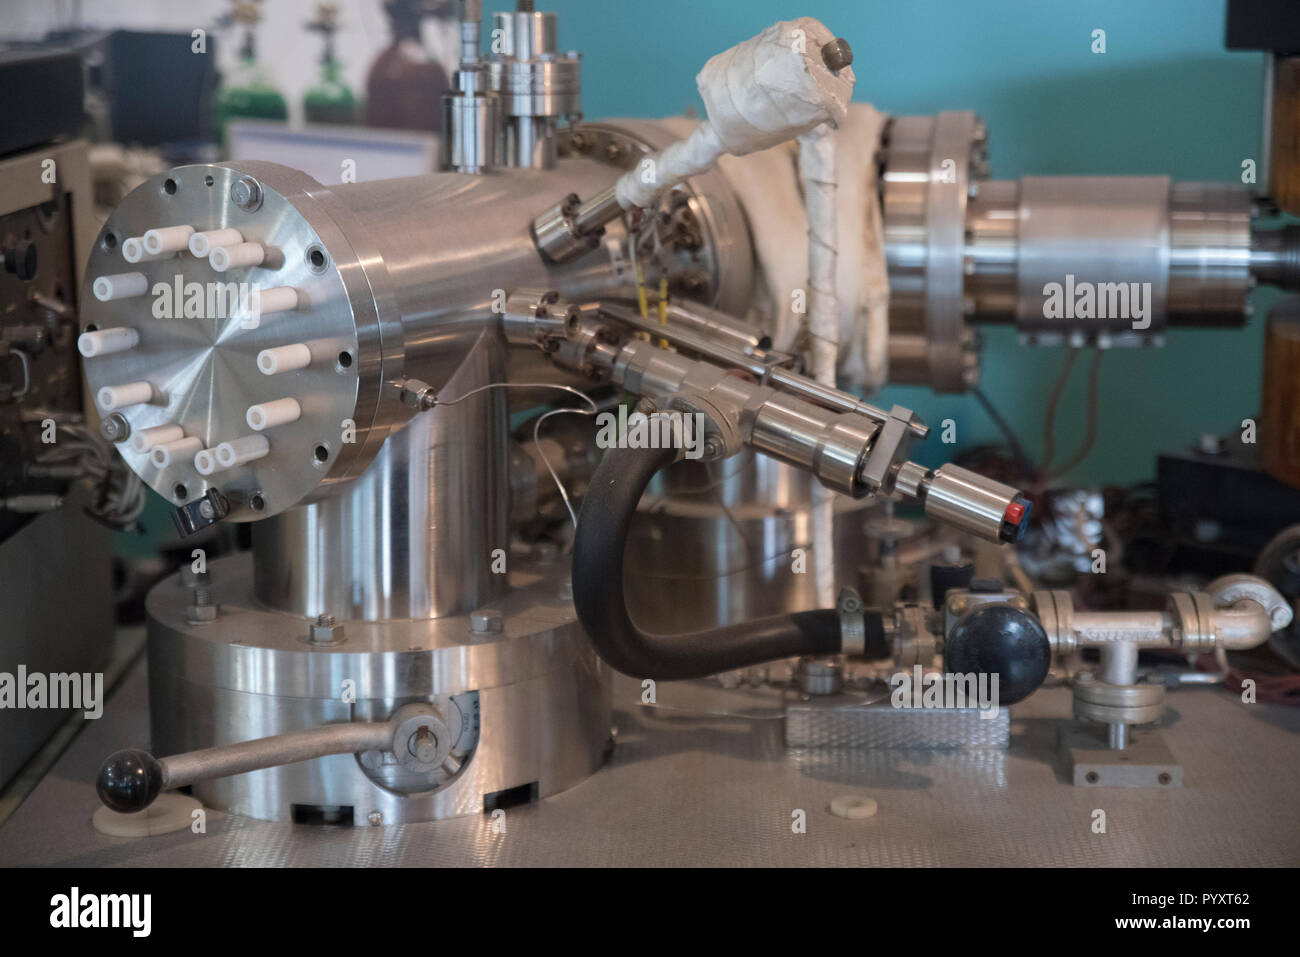 Mass spectrometer at Museum of Science & Industry, Manchester, England Stock Photo